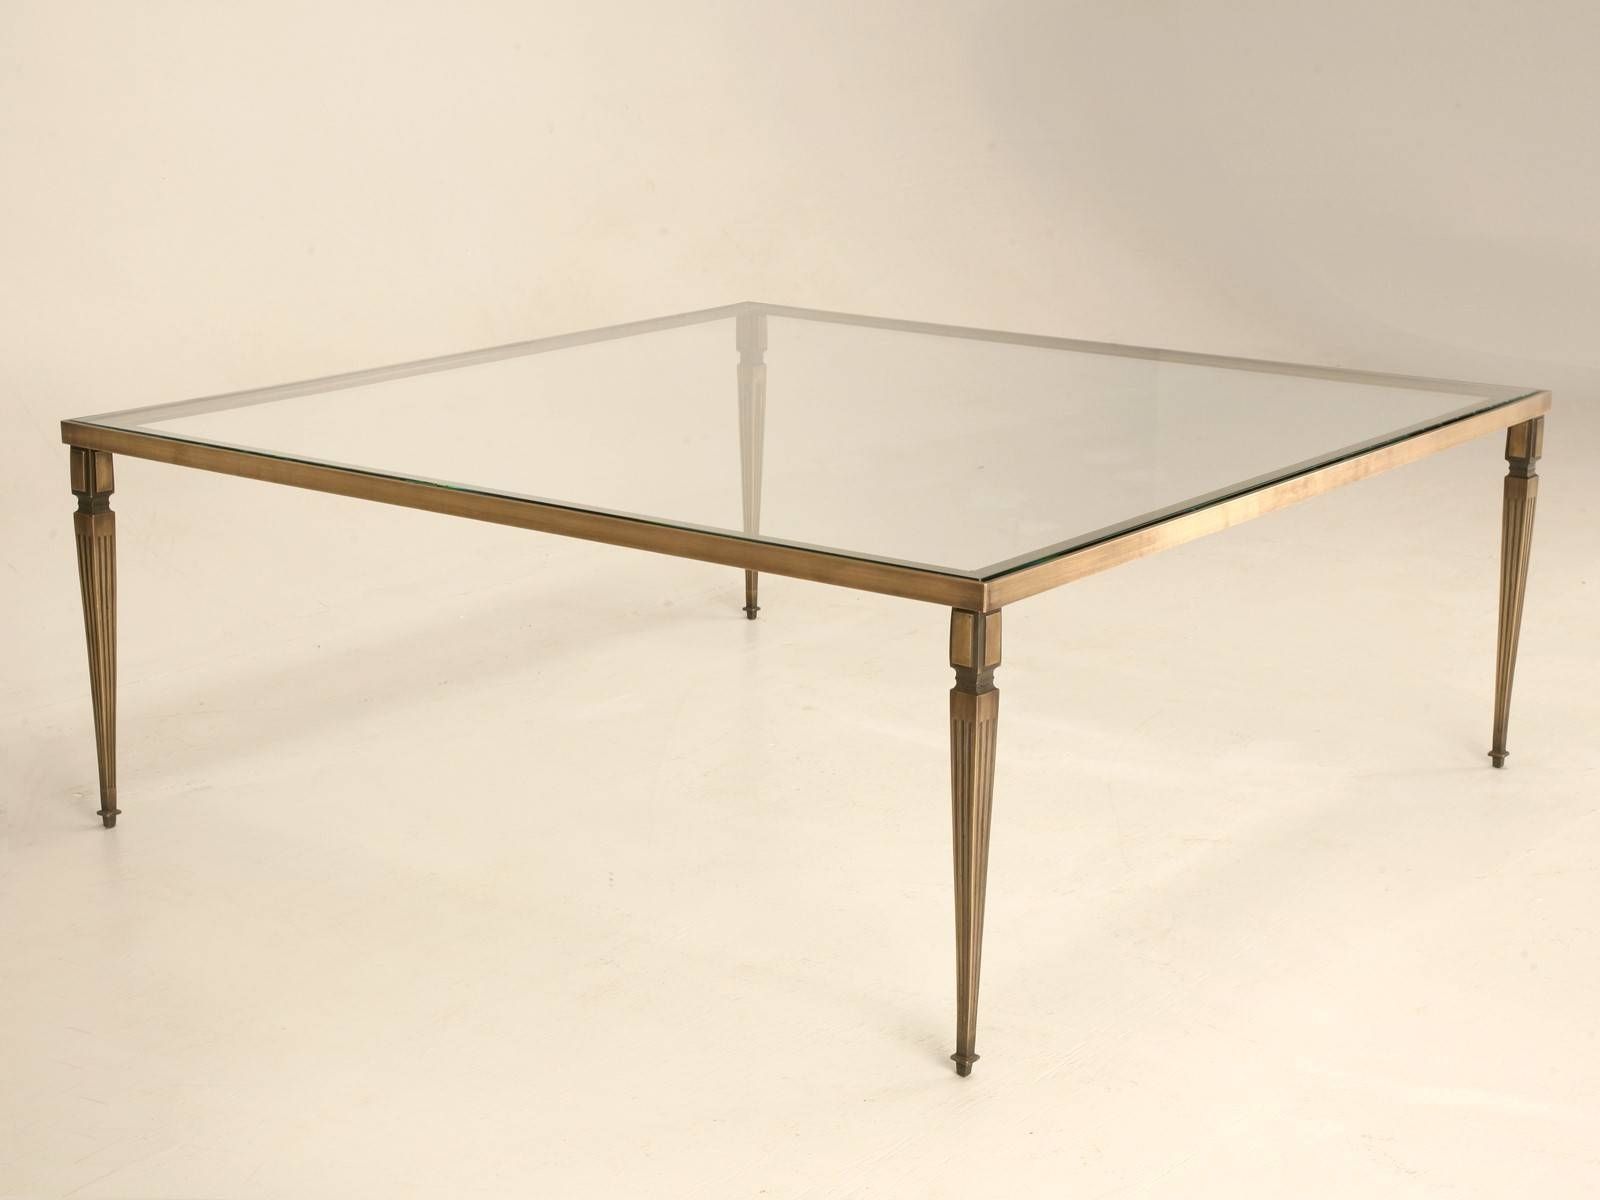 Coffee Table: Charming Bronze Coffee Table Designs Antique Bronze With Bronze And Glass Coffee Tables (View 20 of 30)